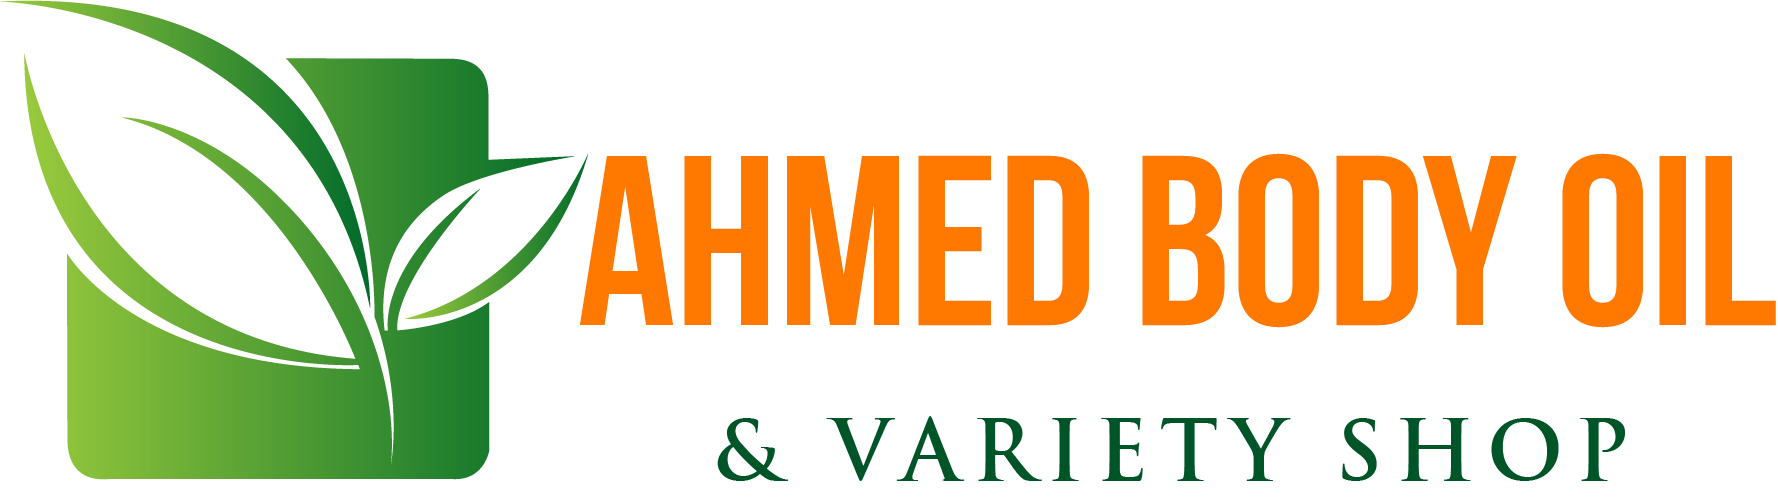 Ahmed Body Oil and Variety Shop